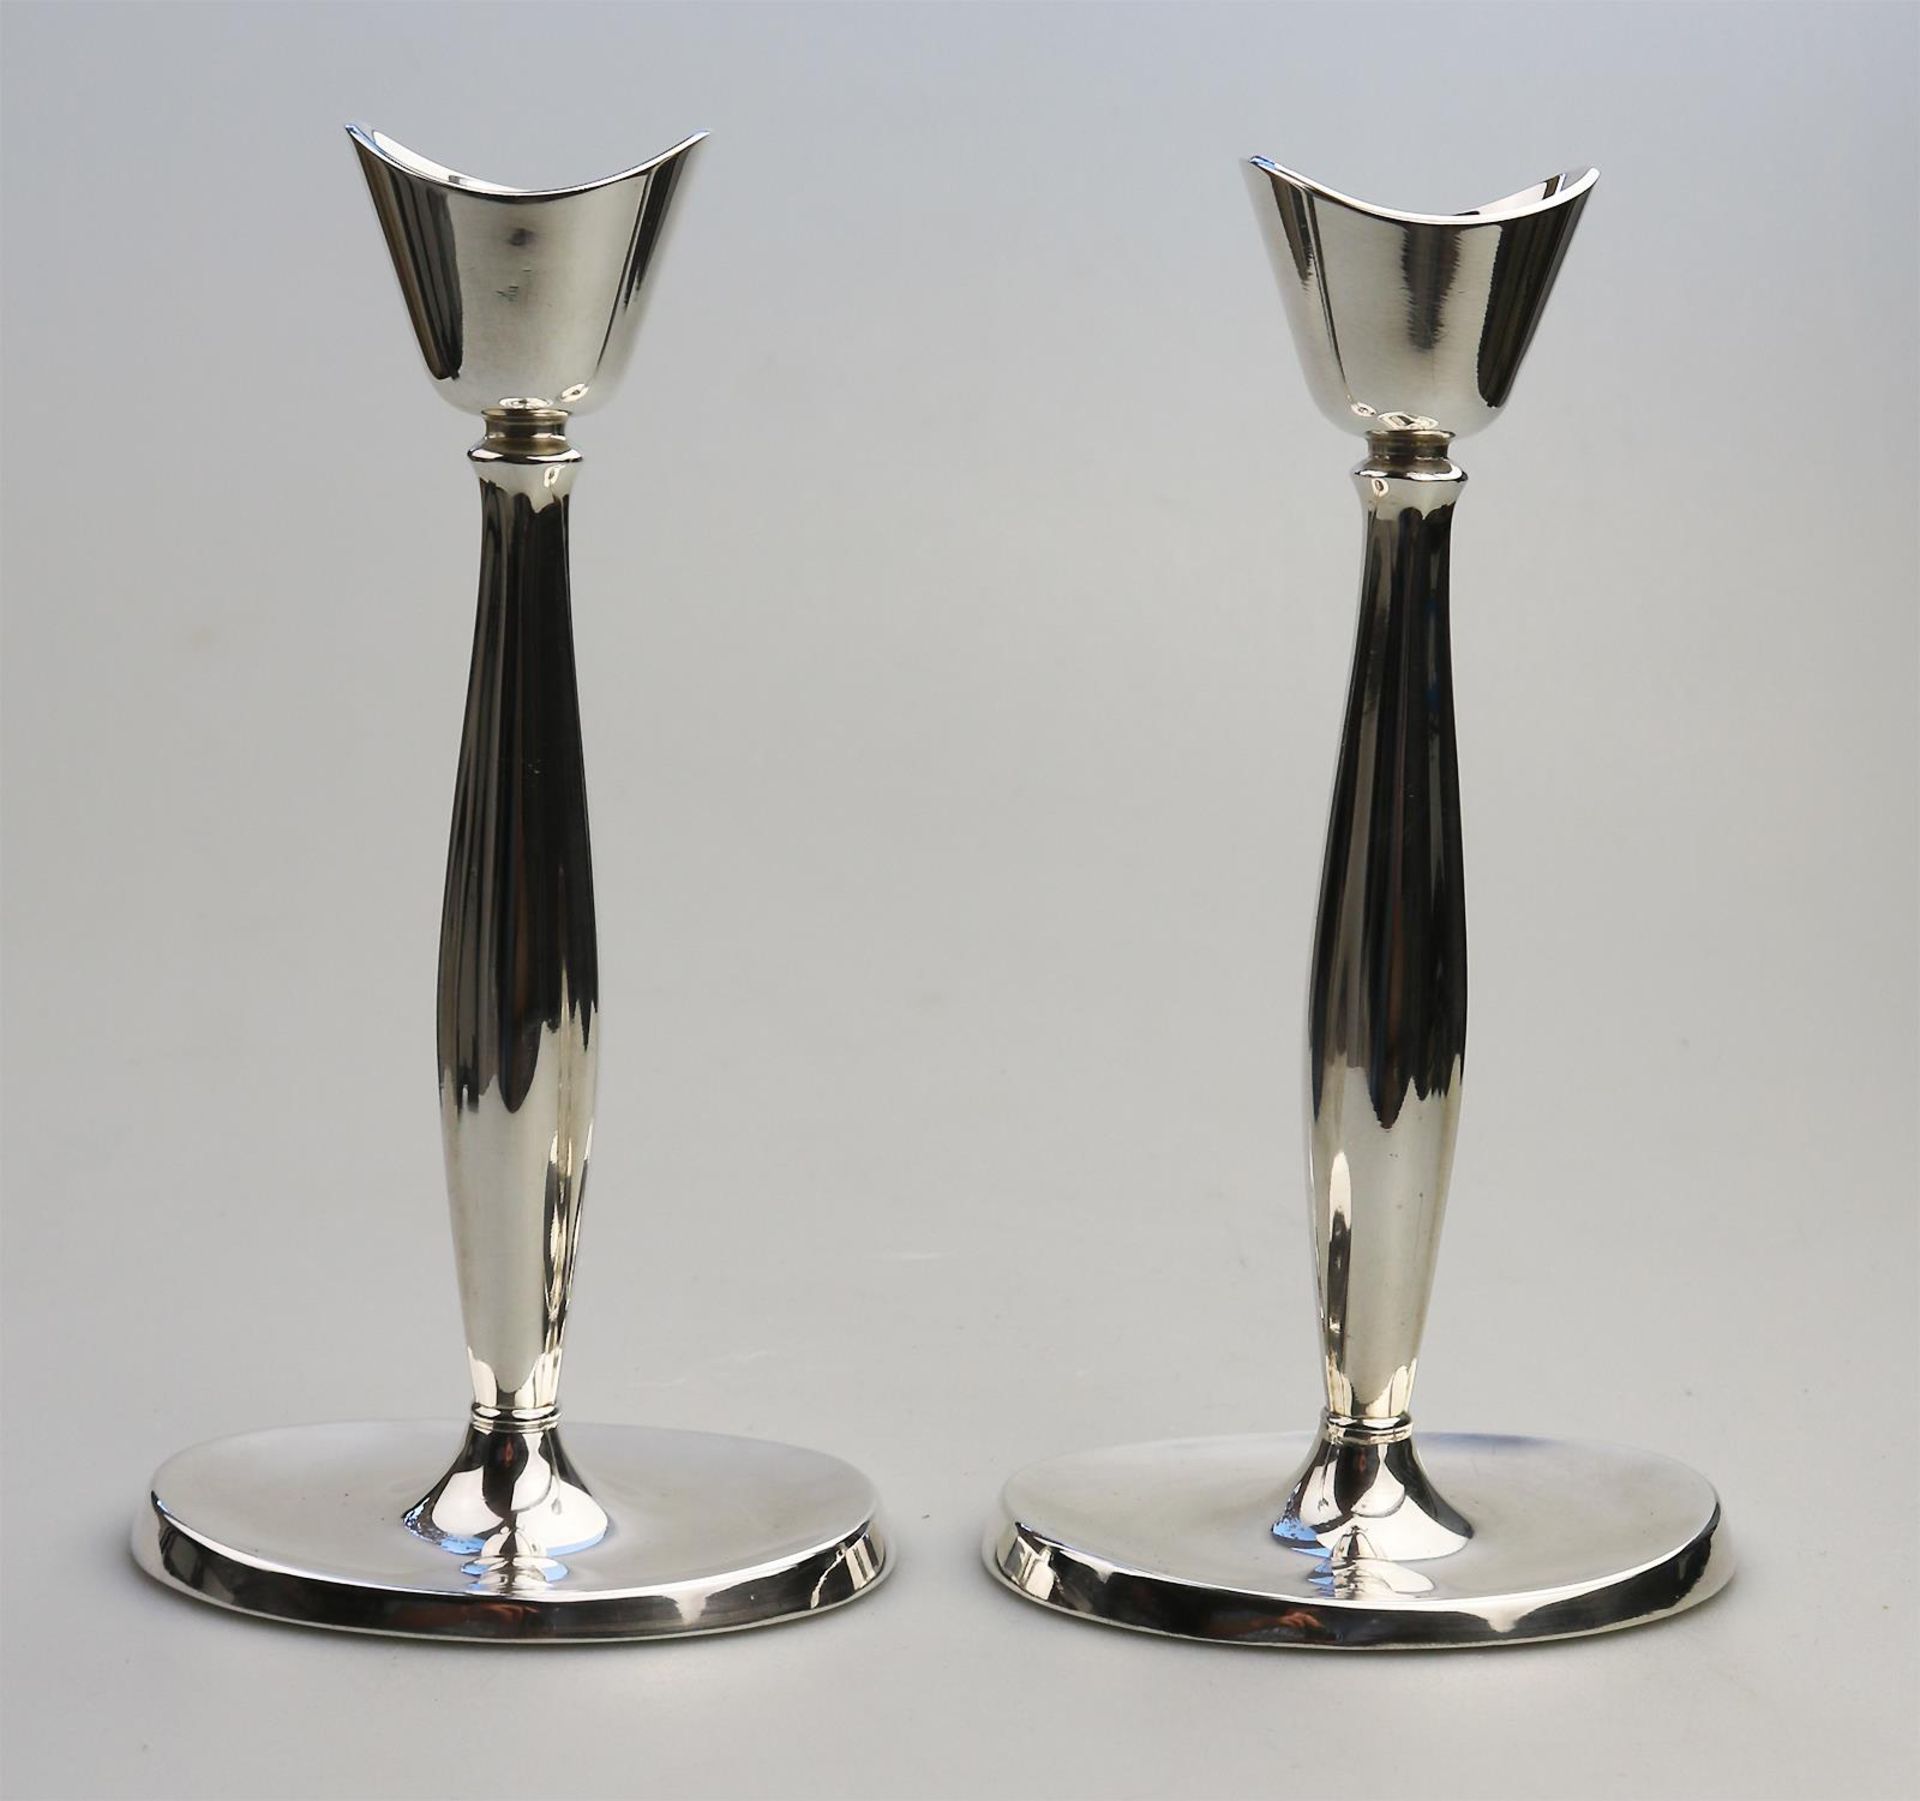 Retro Silver Plate : pair Modernist Candlesticks by Cohr of Denmark C.1950's - Image 2 of 5